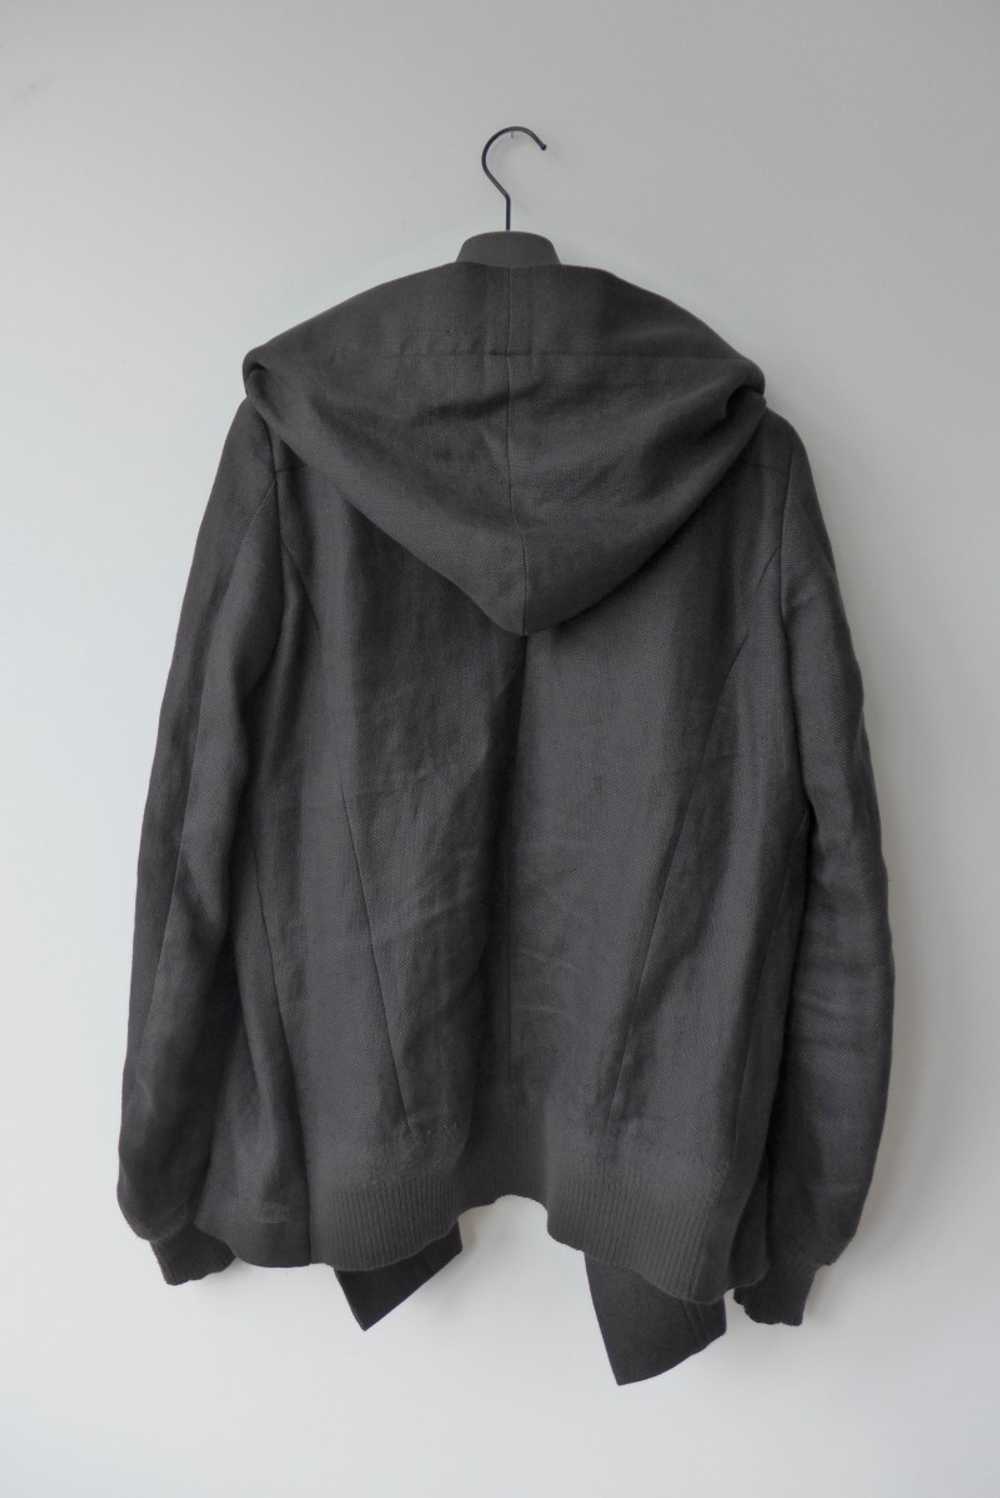 Rare hooded Jacket by The Viridi-Anne x - image 4